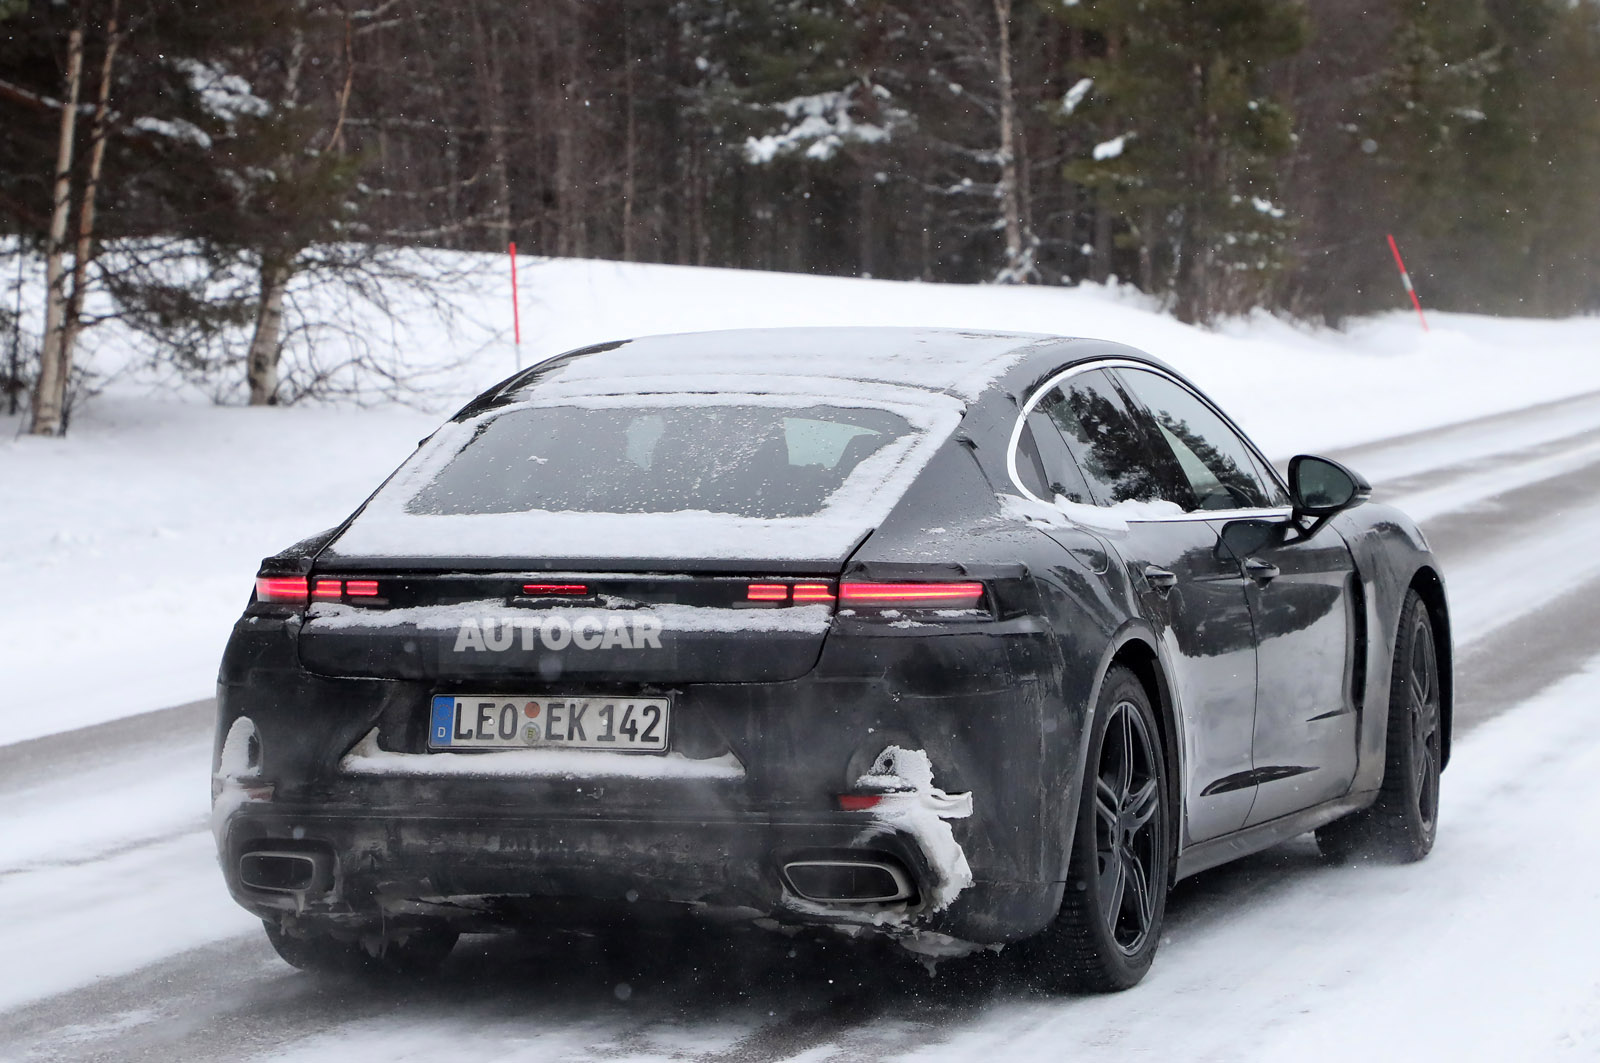 New Porsche Panamera confirmed for late-2023 launch